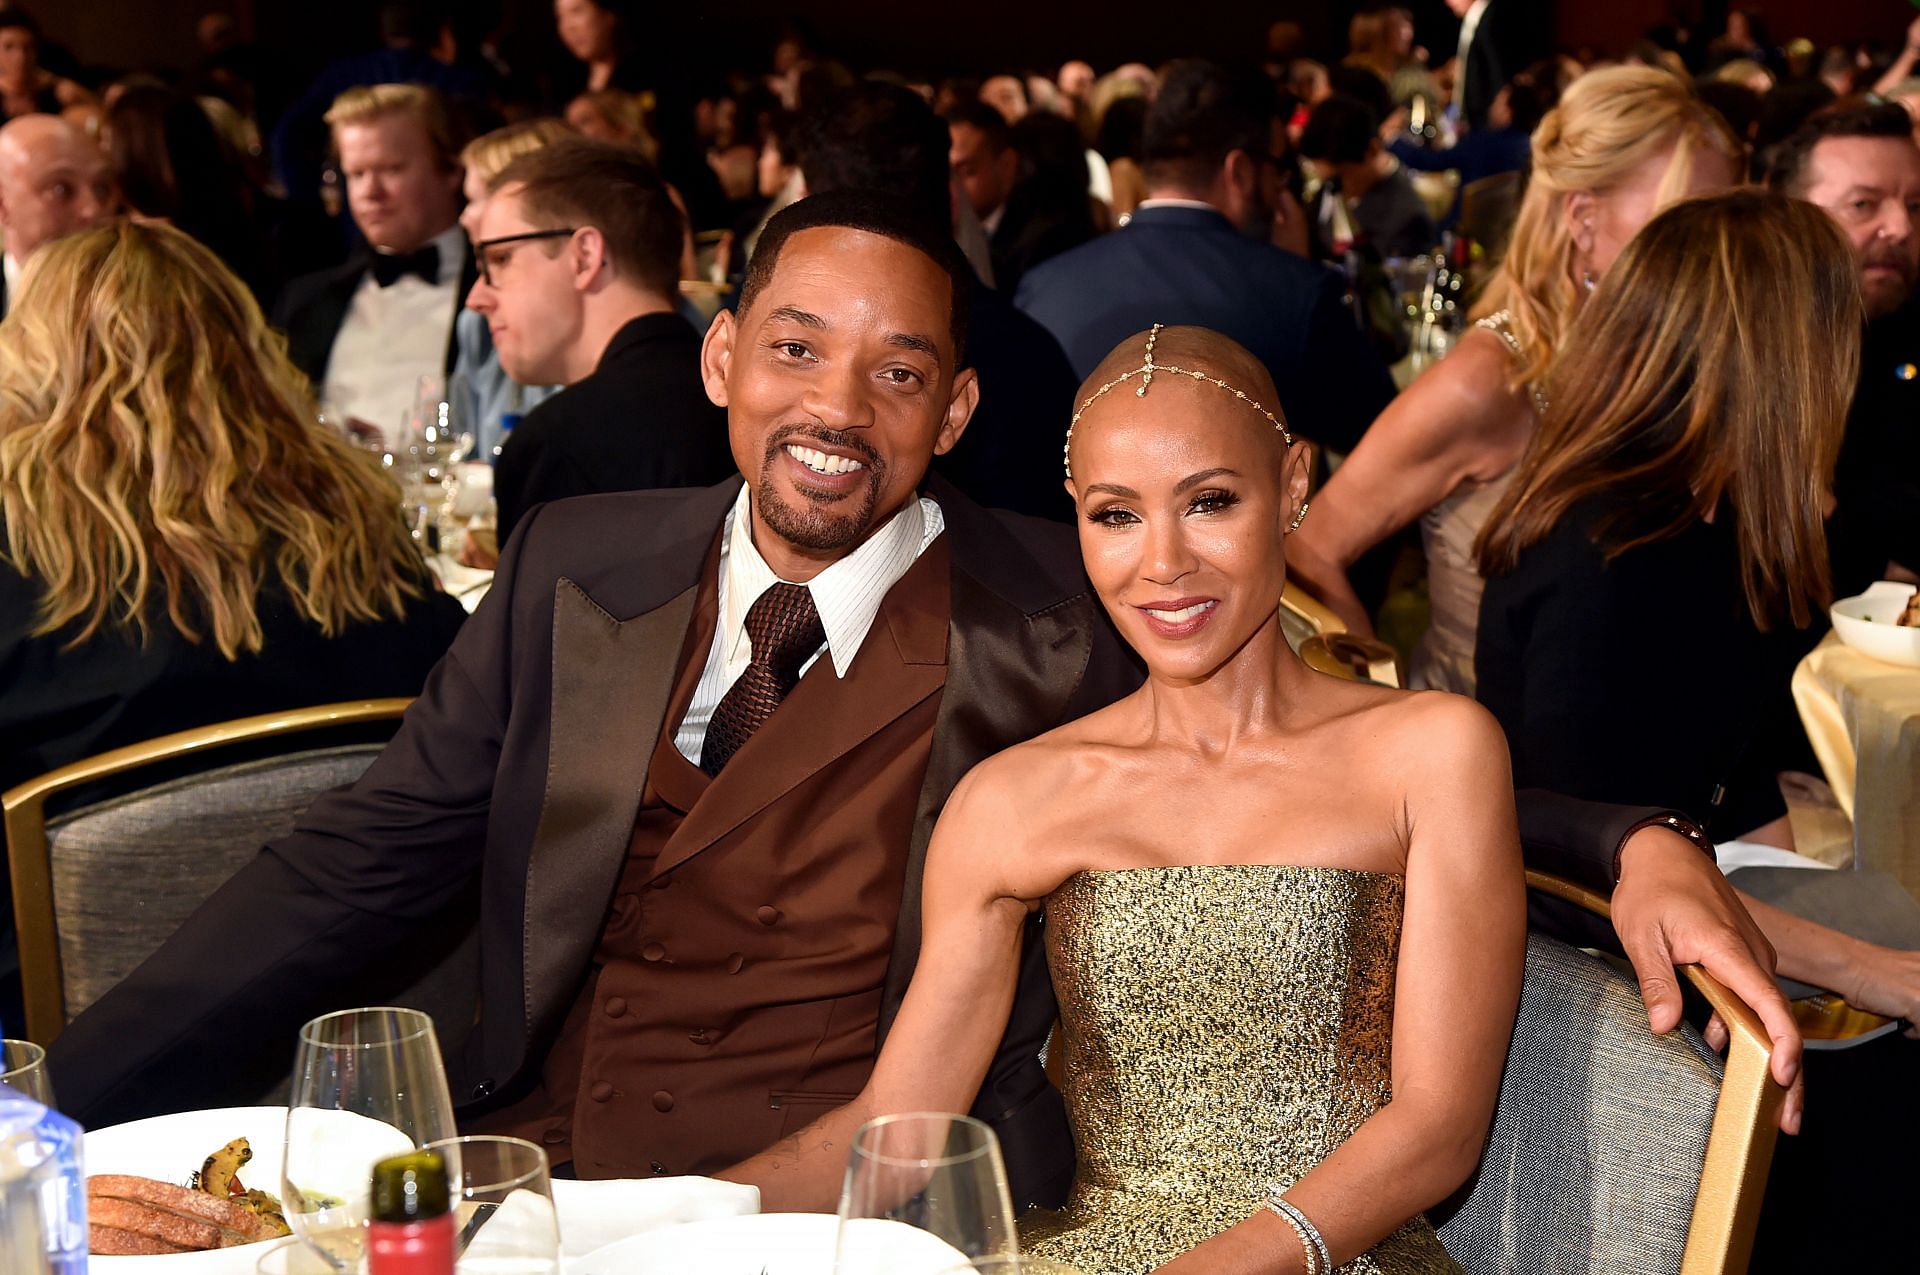 Will Smith said his wife is his Ride or die (Image via Getty)